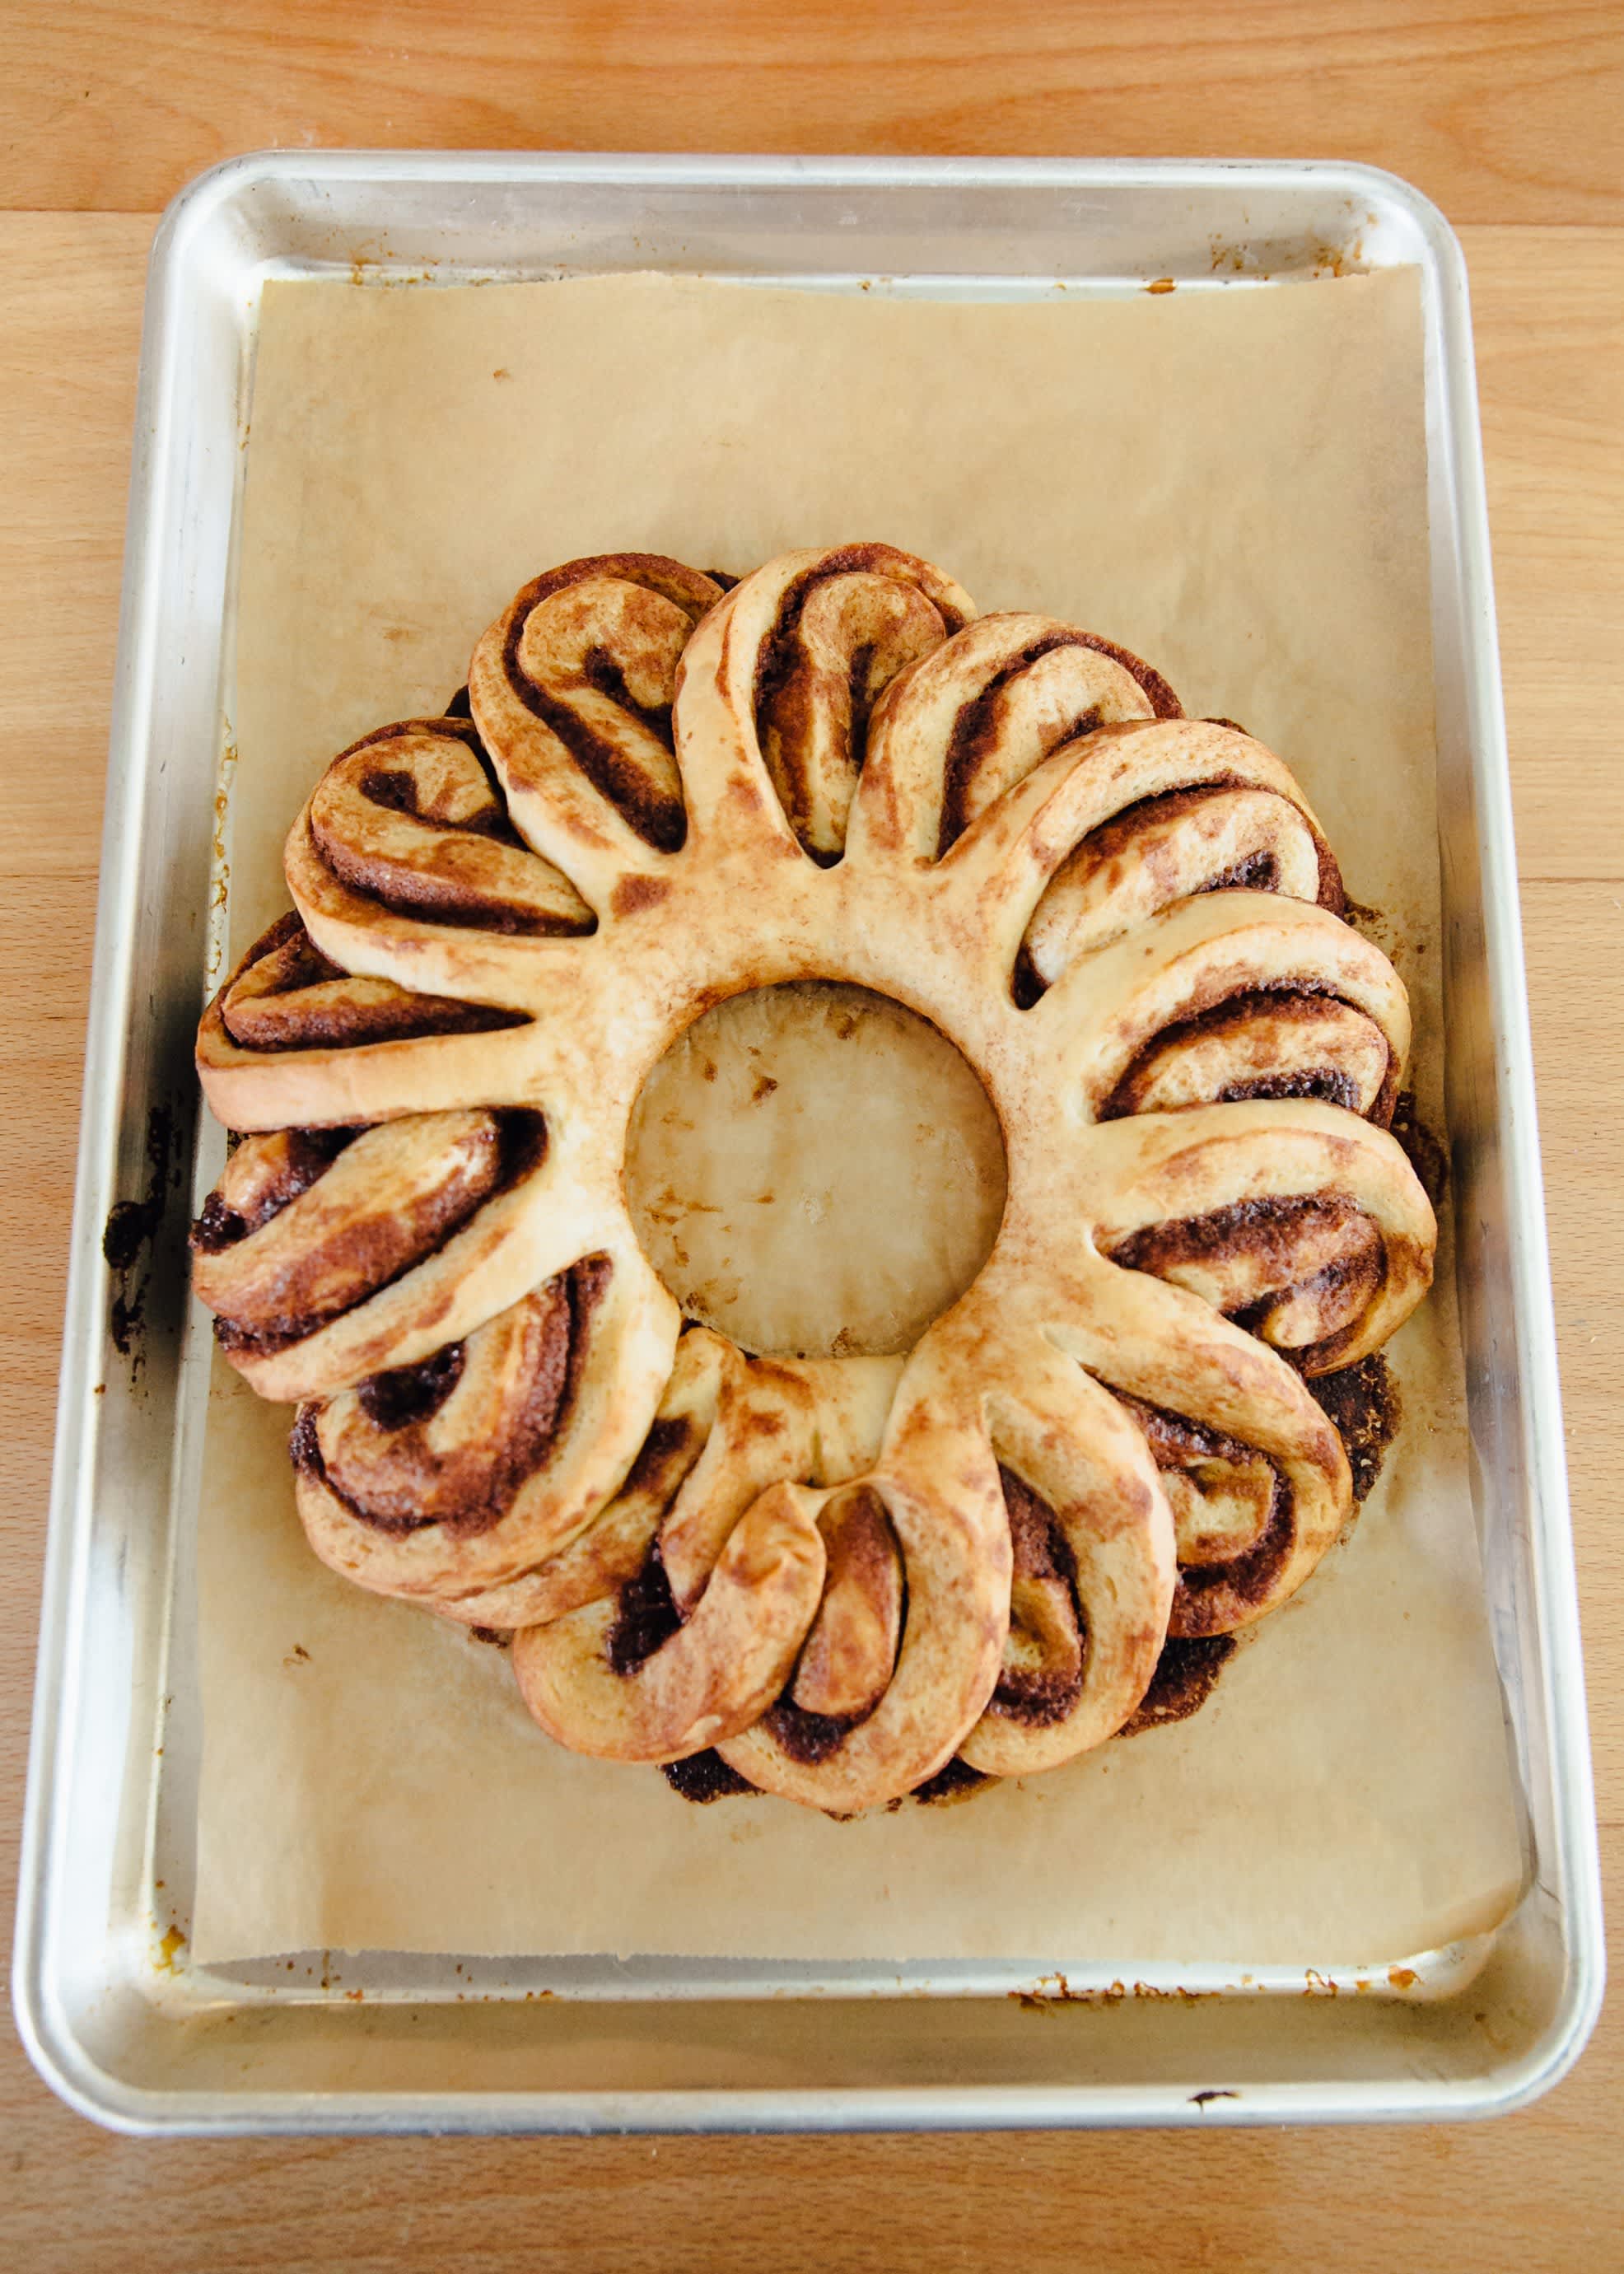 How To Make a Cinnamon Roll Wreath | Kitchn